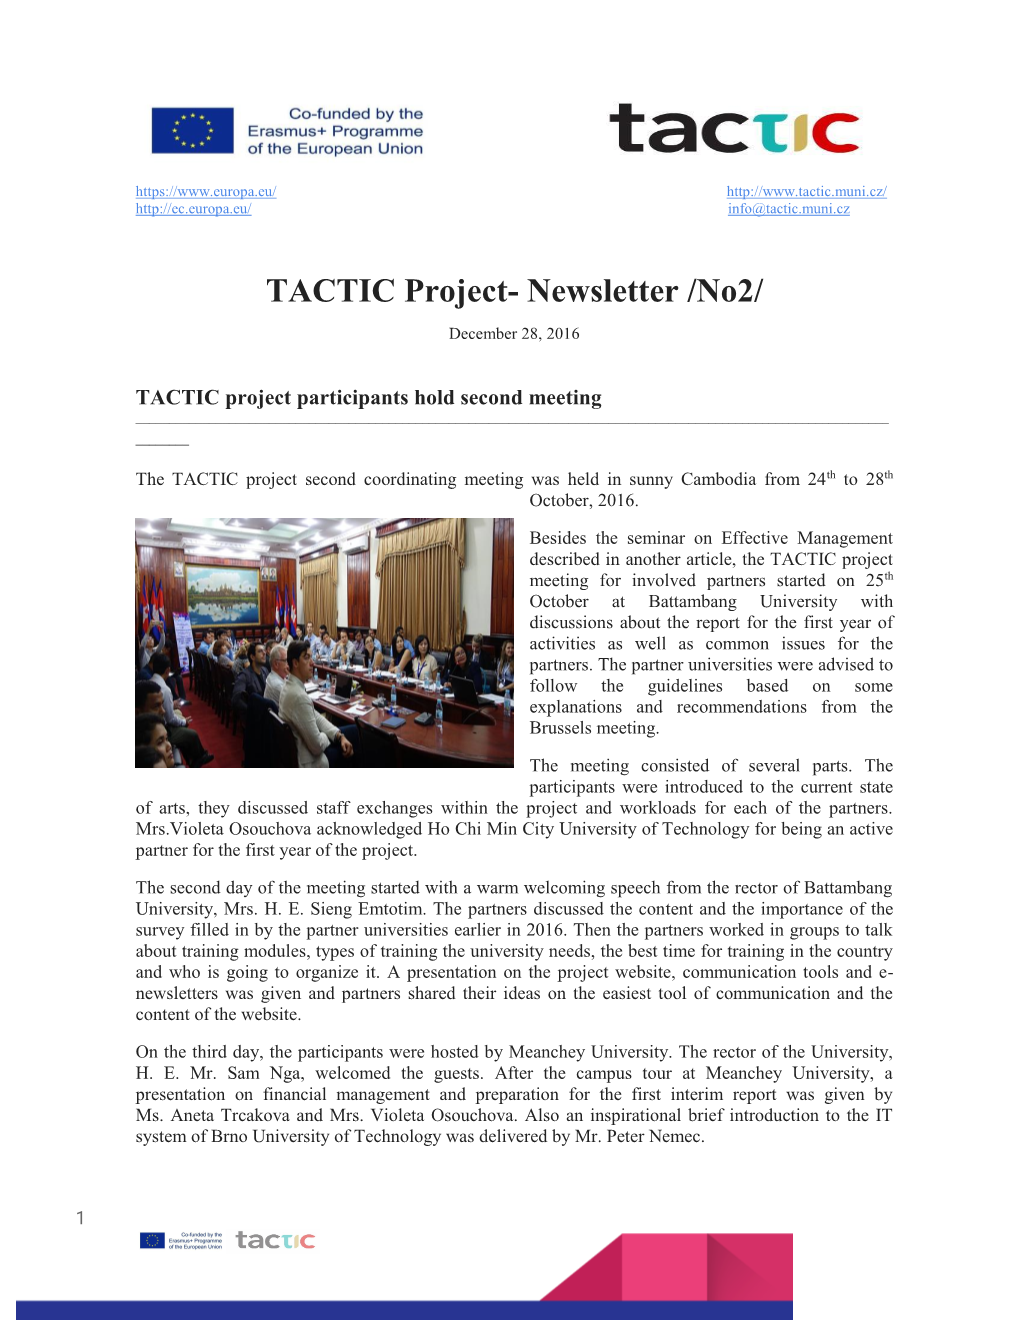 TACTIC Project- Newsletter /No2/ December 28, 2016